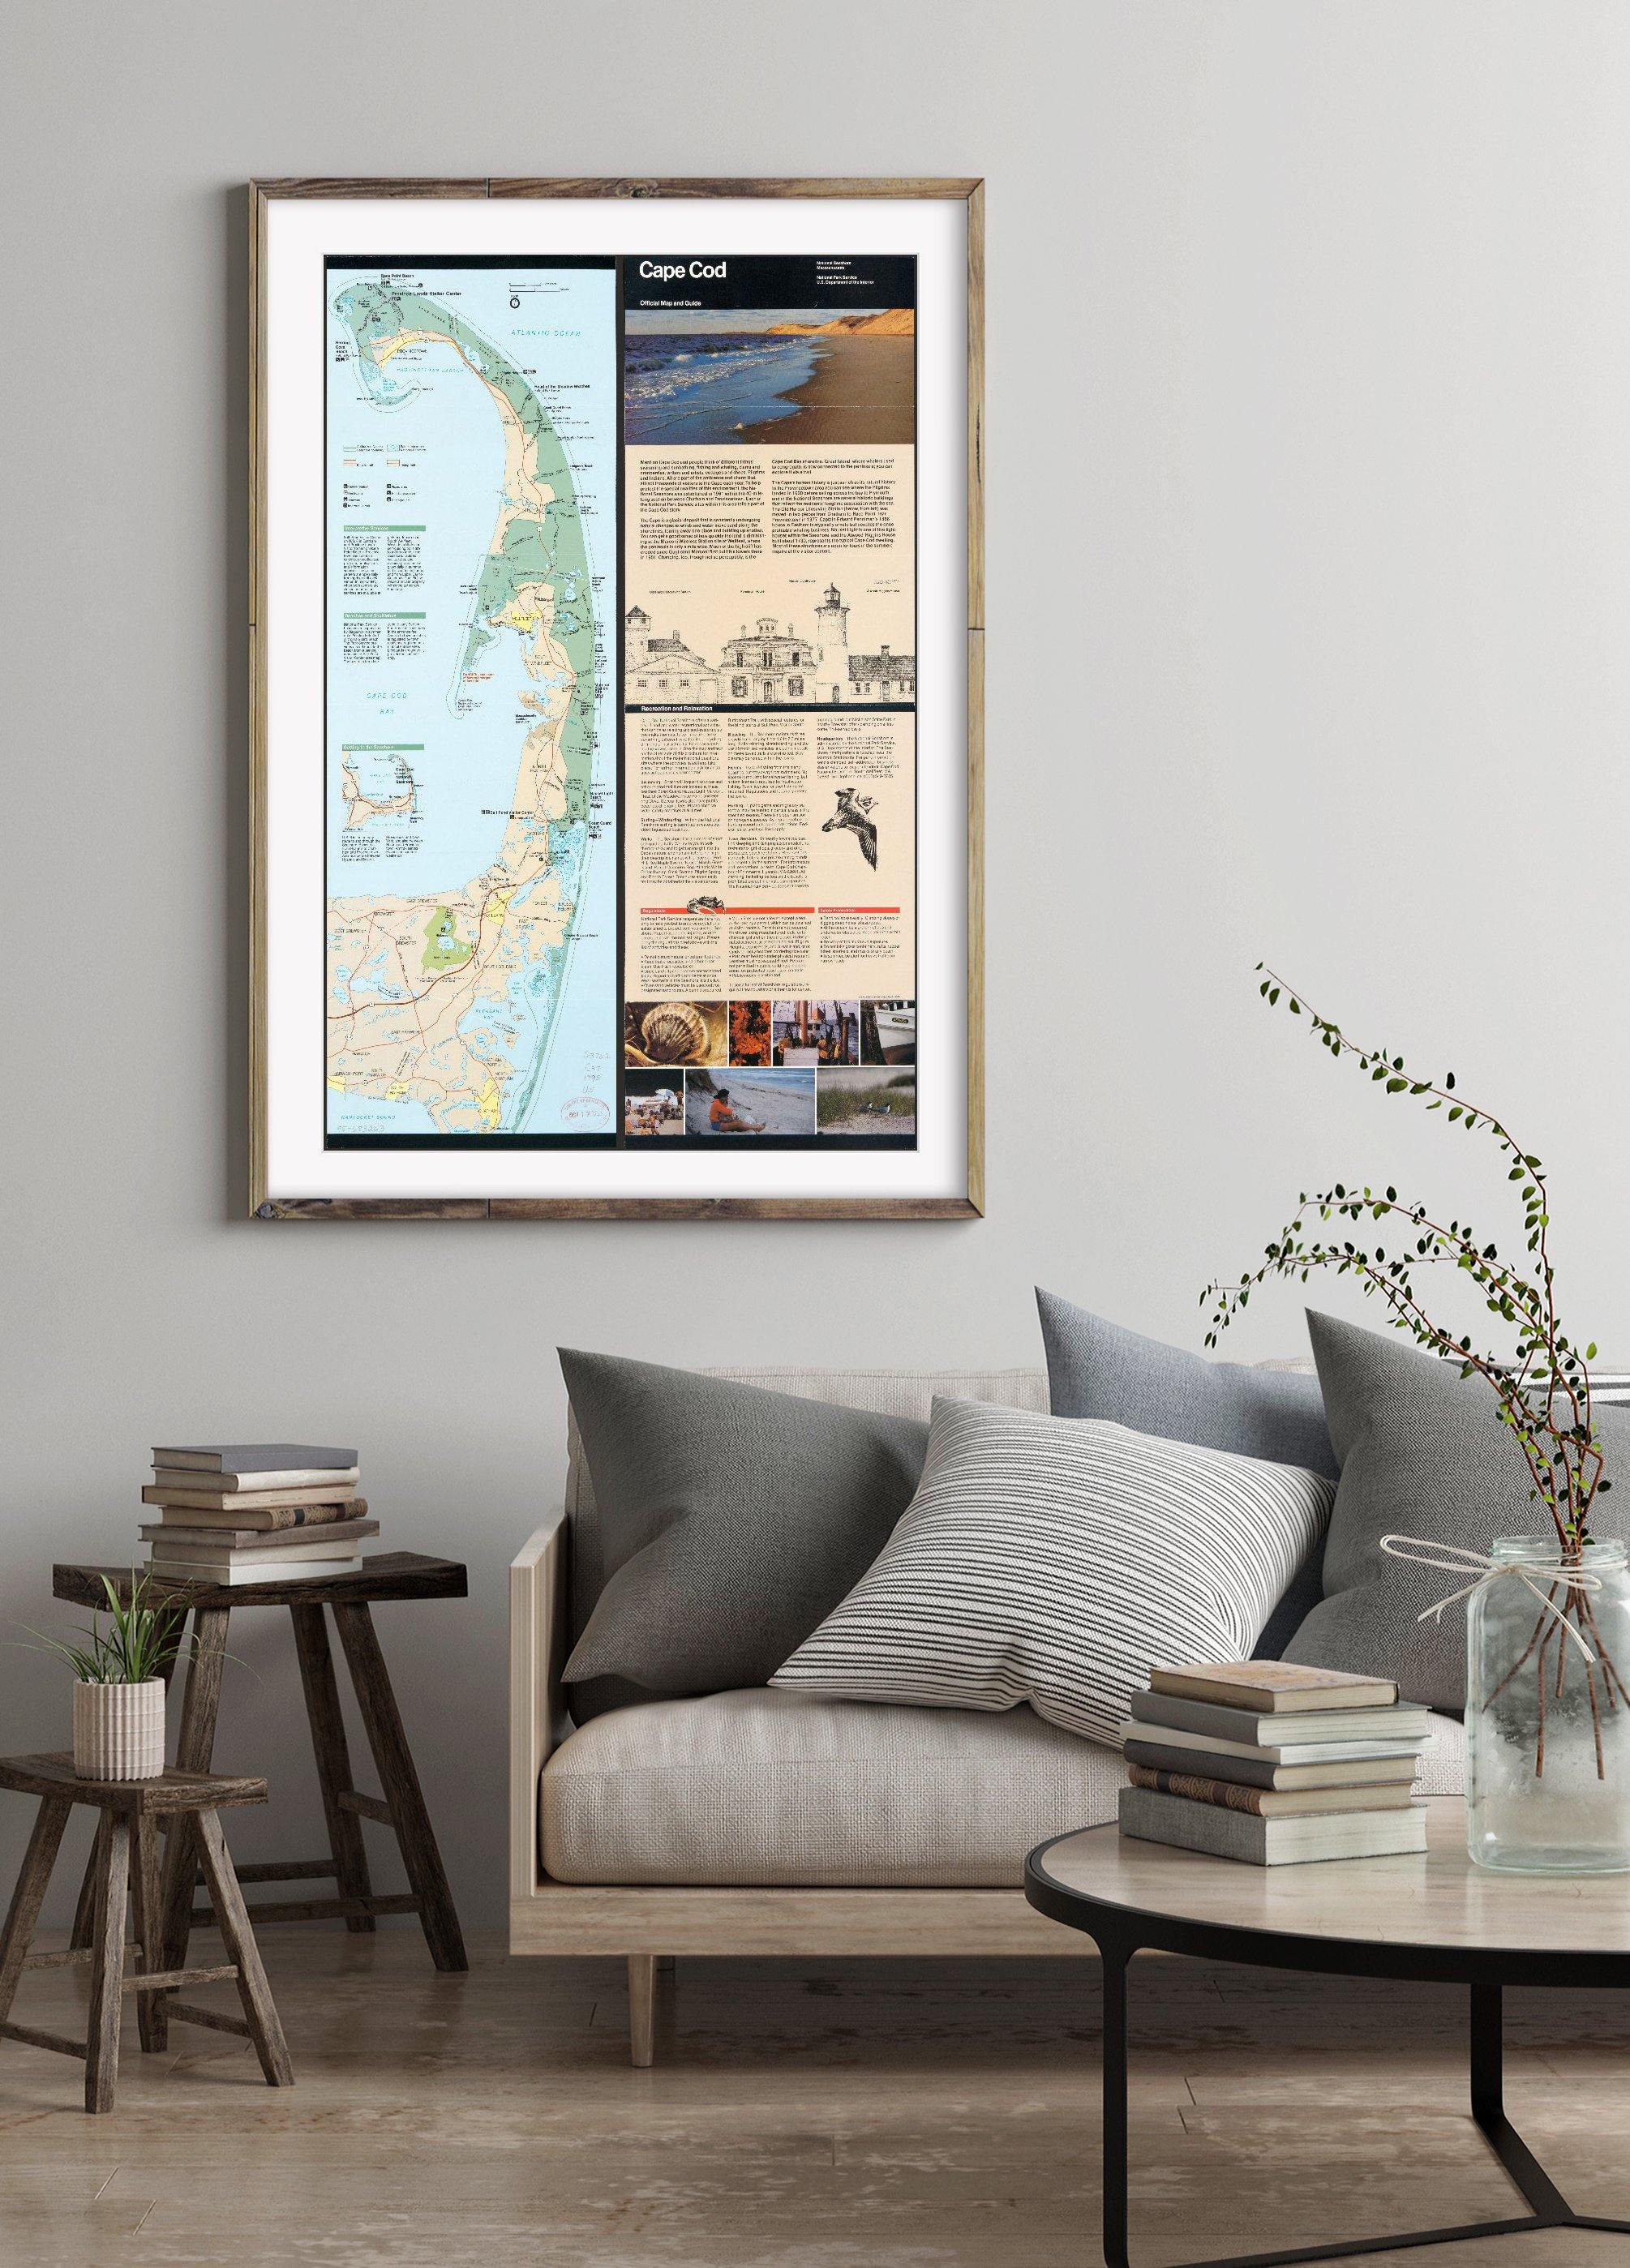 1995 Map| Cape Cod National Seashore, Massachusetts, official map and - New York Map Company